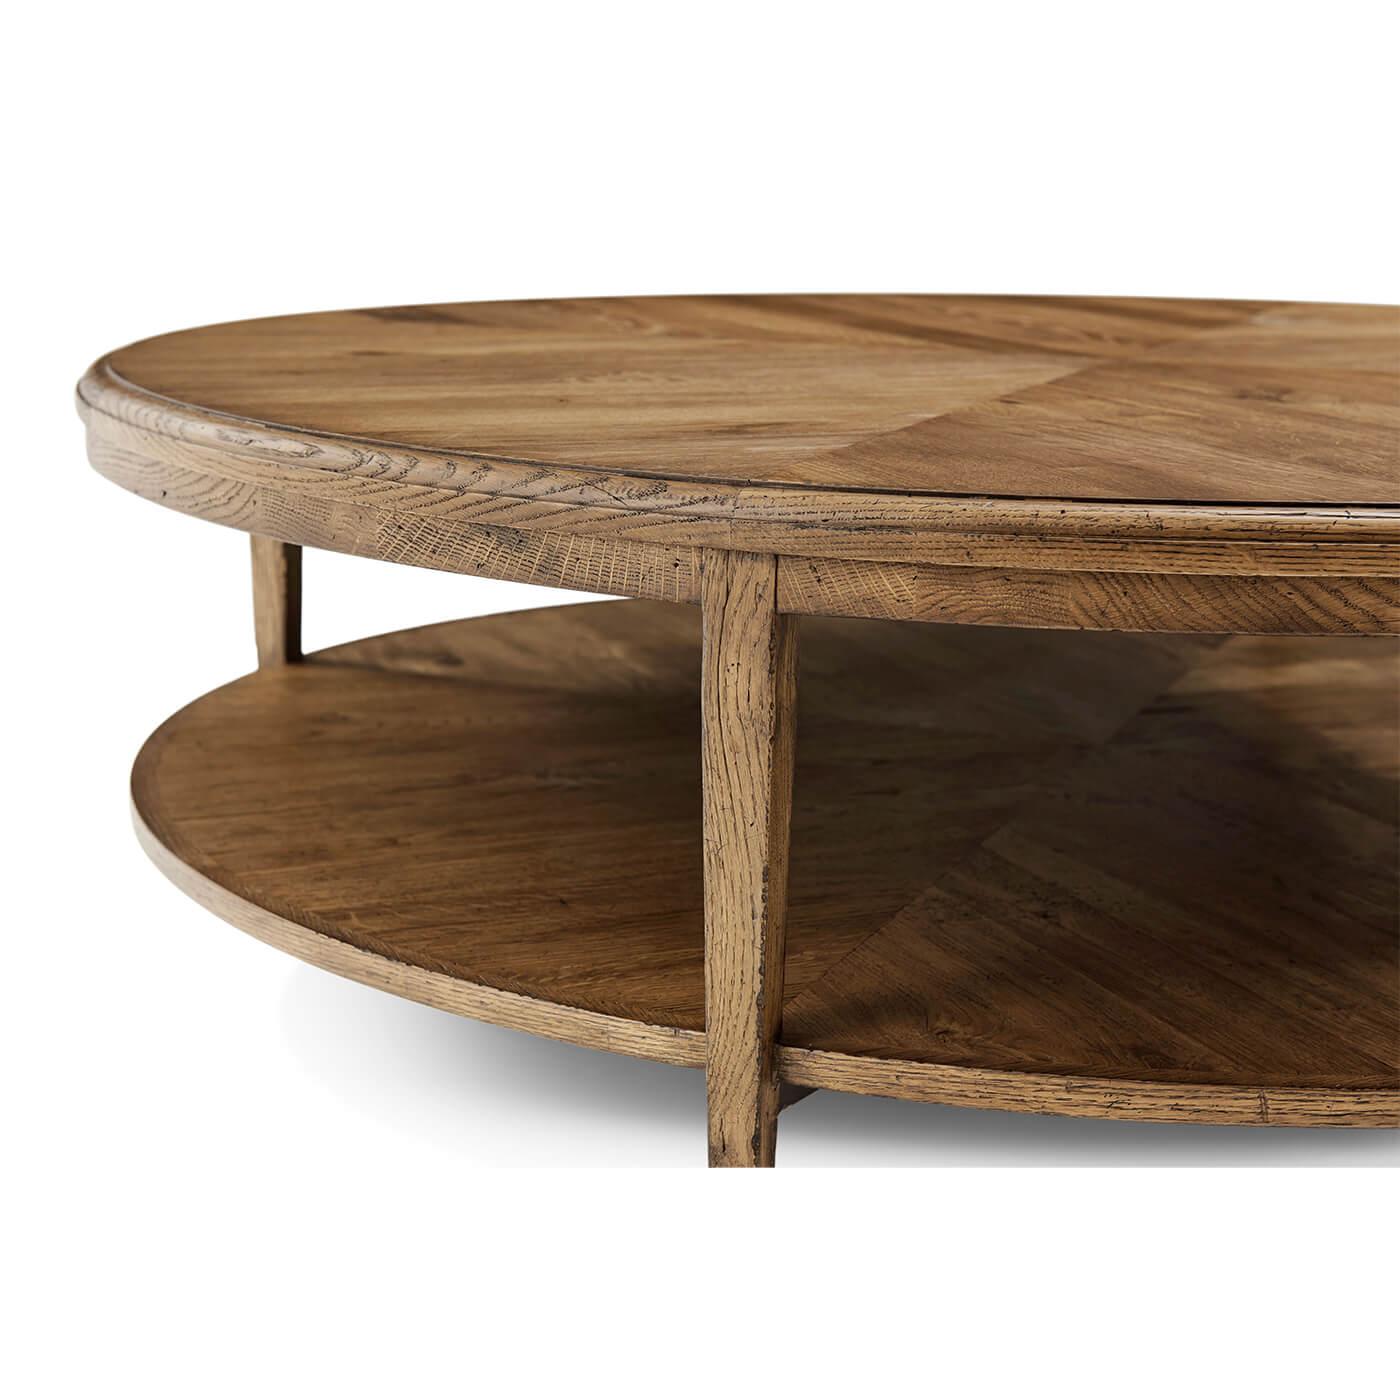 A modern light oak parquetry round coffee table with a concentric oak sitting on a tapered oak leg. Finished in our light oak Dawn finish.

Dimensions: 52